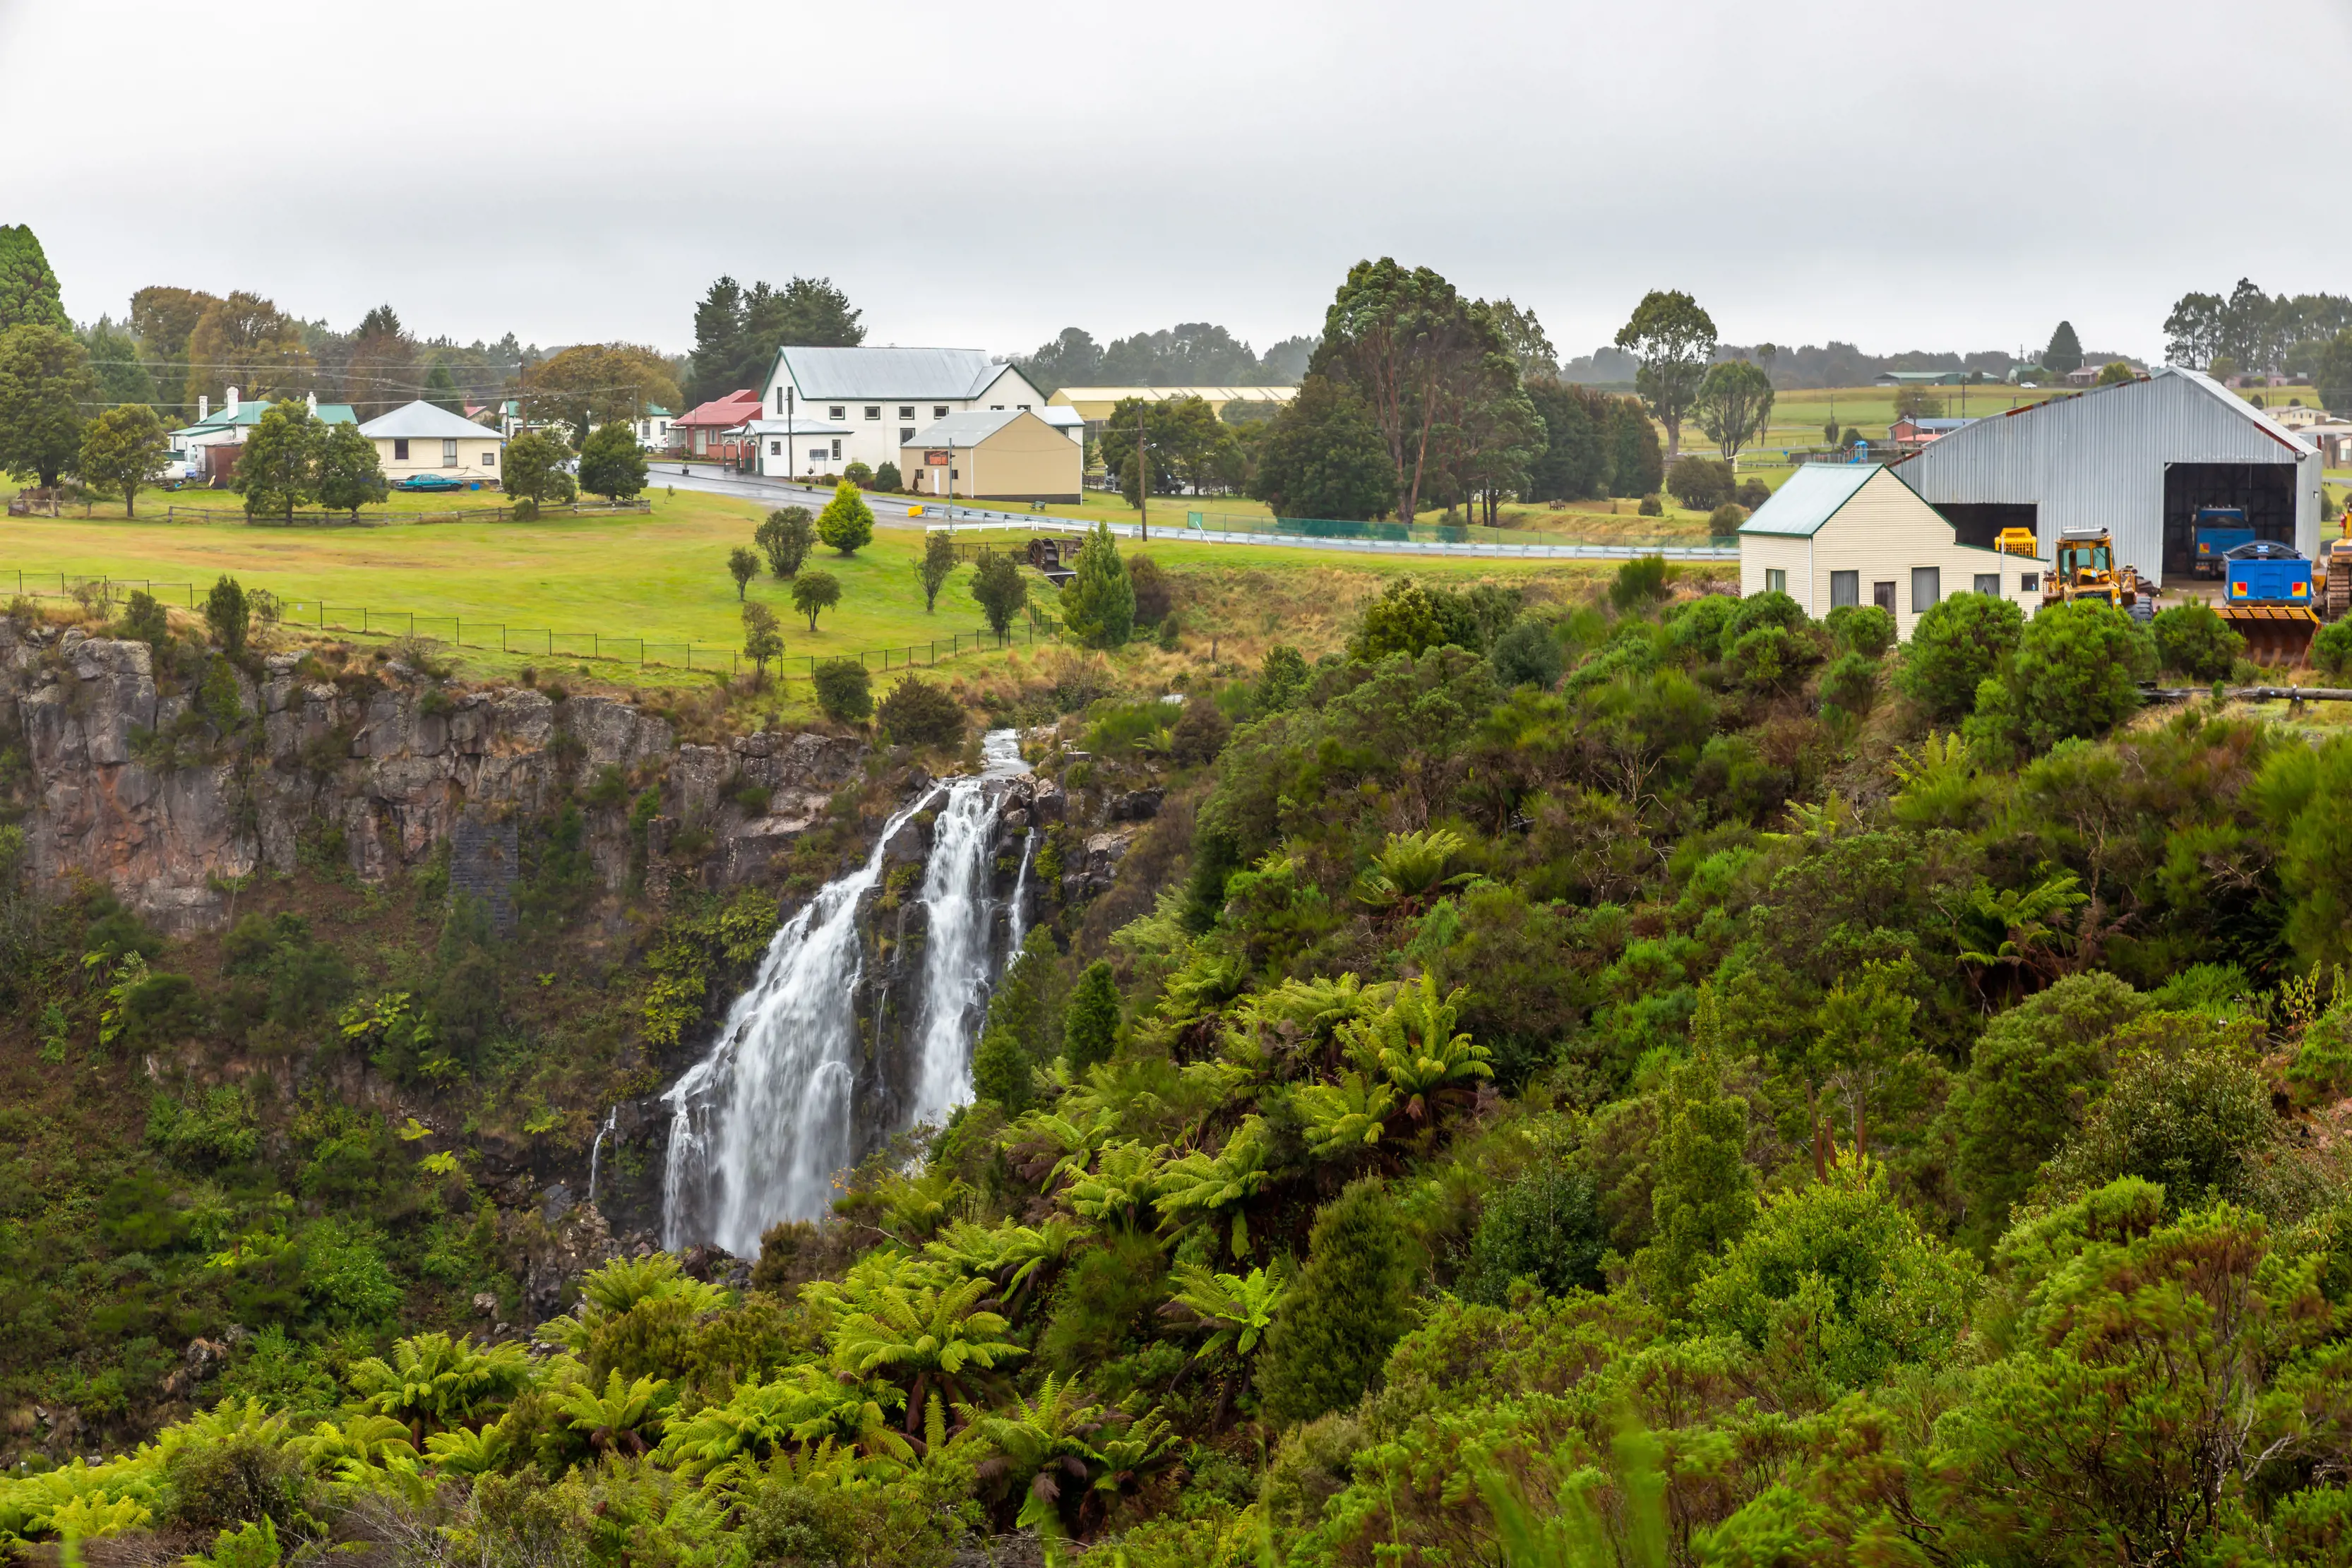 Wide angle view of Waratah Falls with buildings from the historic town of Warath sit above in the background while ferns fill the foreground.